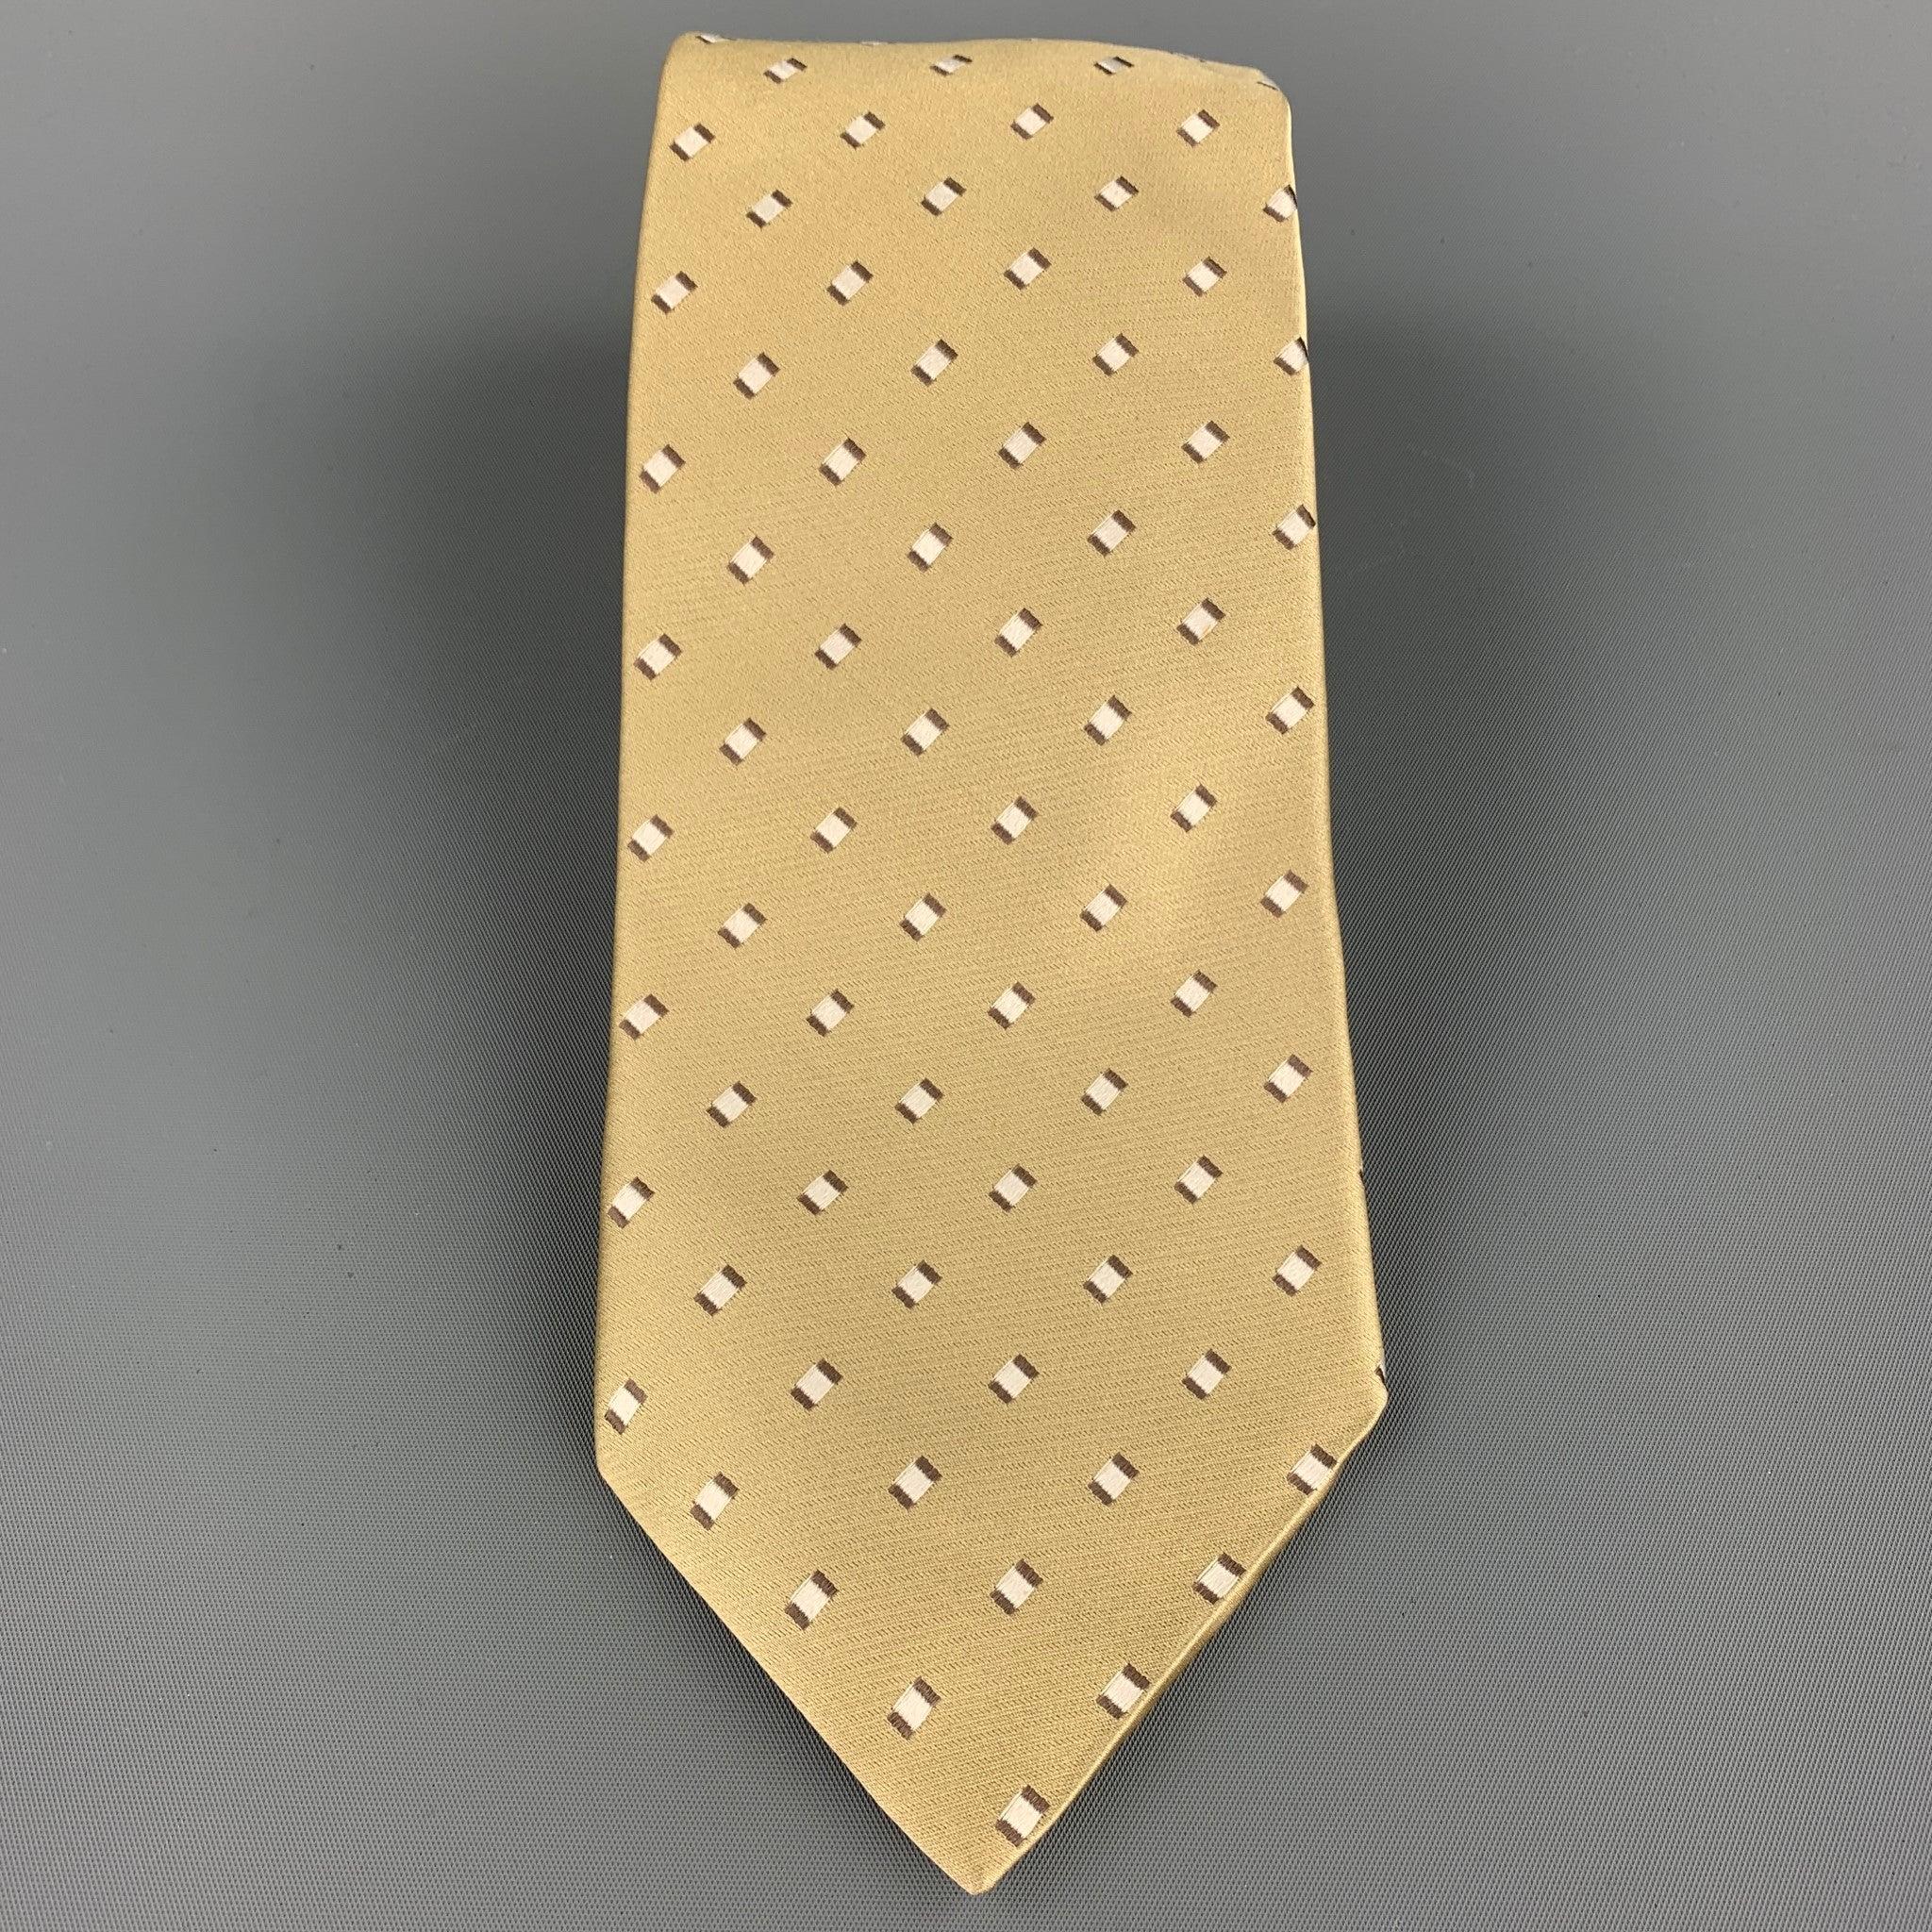 ERMENEGILDO ZEGNA tie comes in a gold square print silk. Made in Italy.Very Good Pre-Owned Condition.Width: 4 inches  
  
  
 
Reference: 107883
Category: Tie
More Details
    
Brand:  ERMENEGILDO ZEGNA
Color:  Gold
Pattern:  Squares
Fabric: 